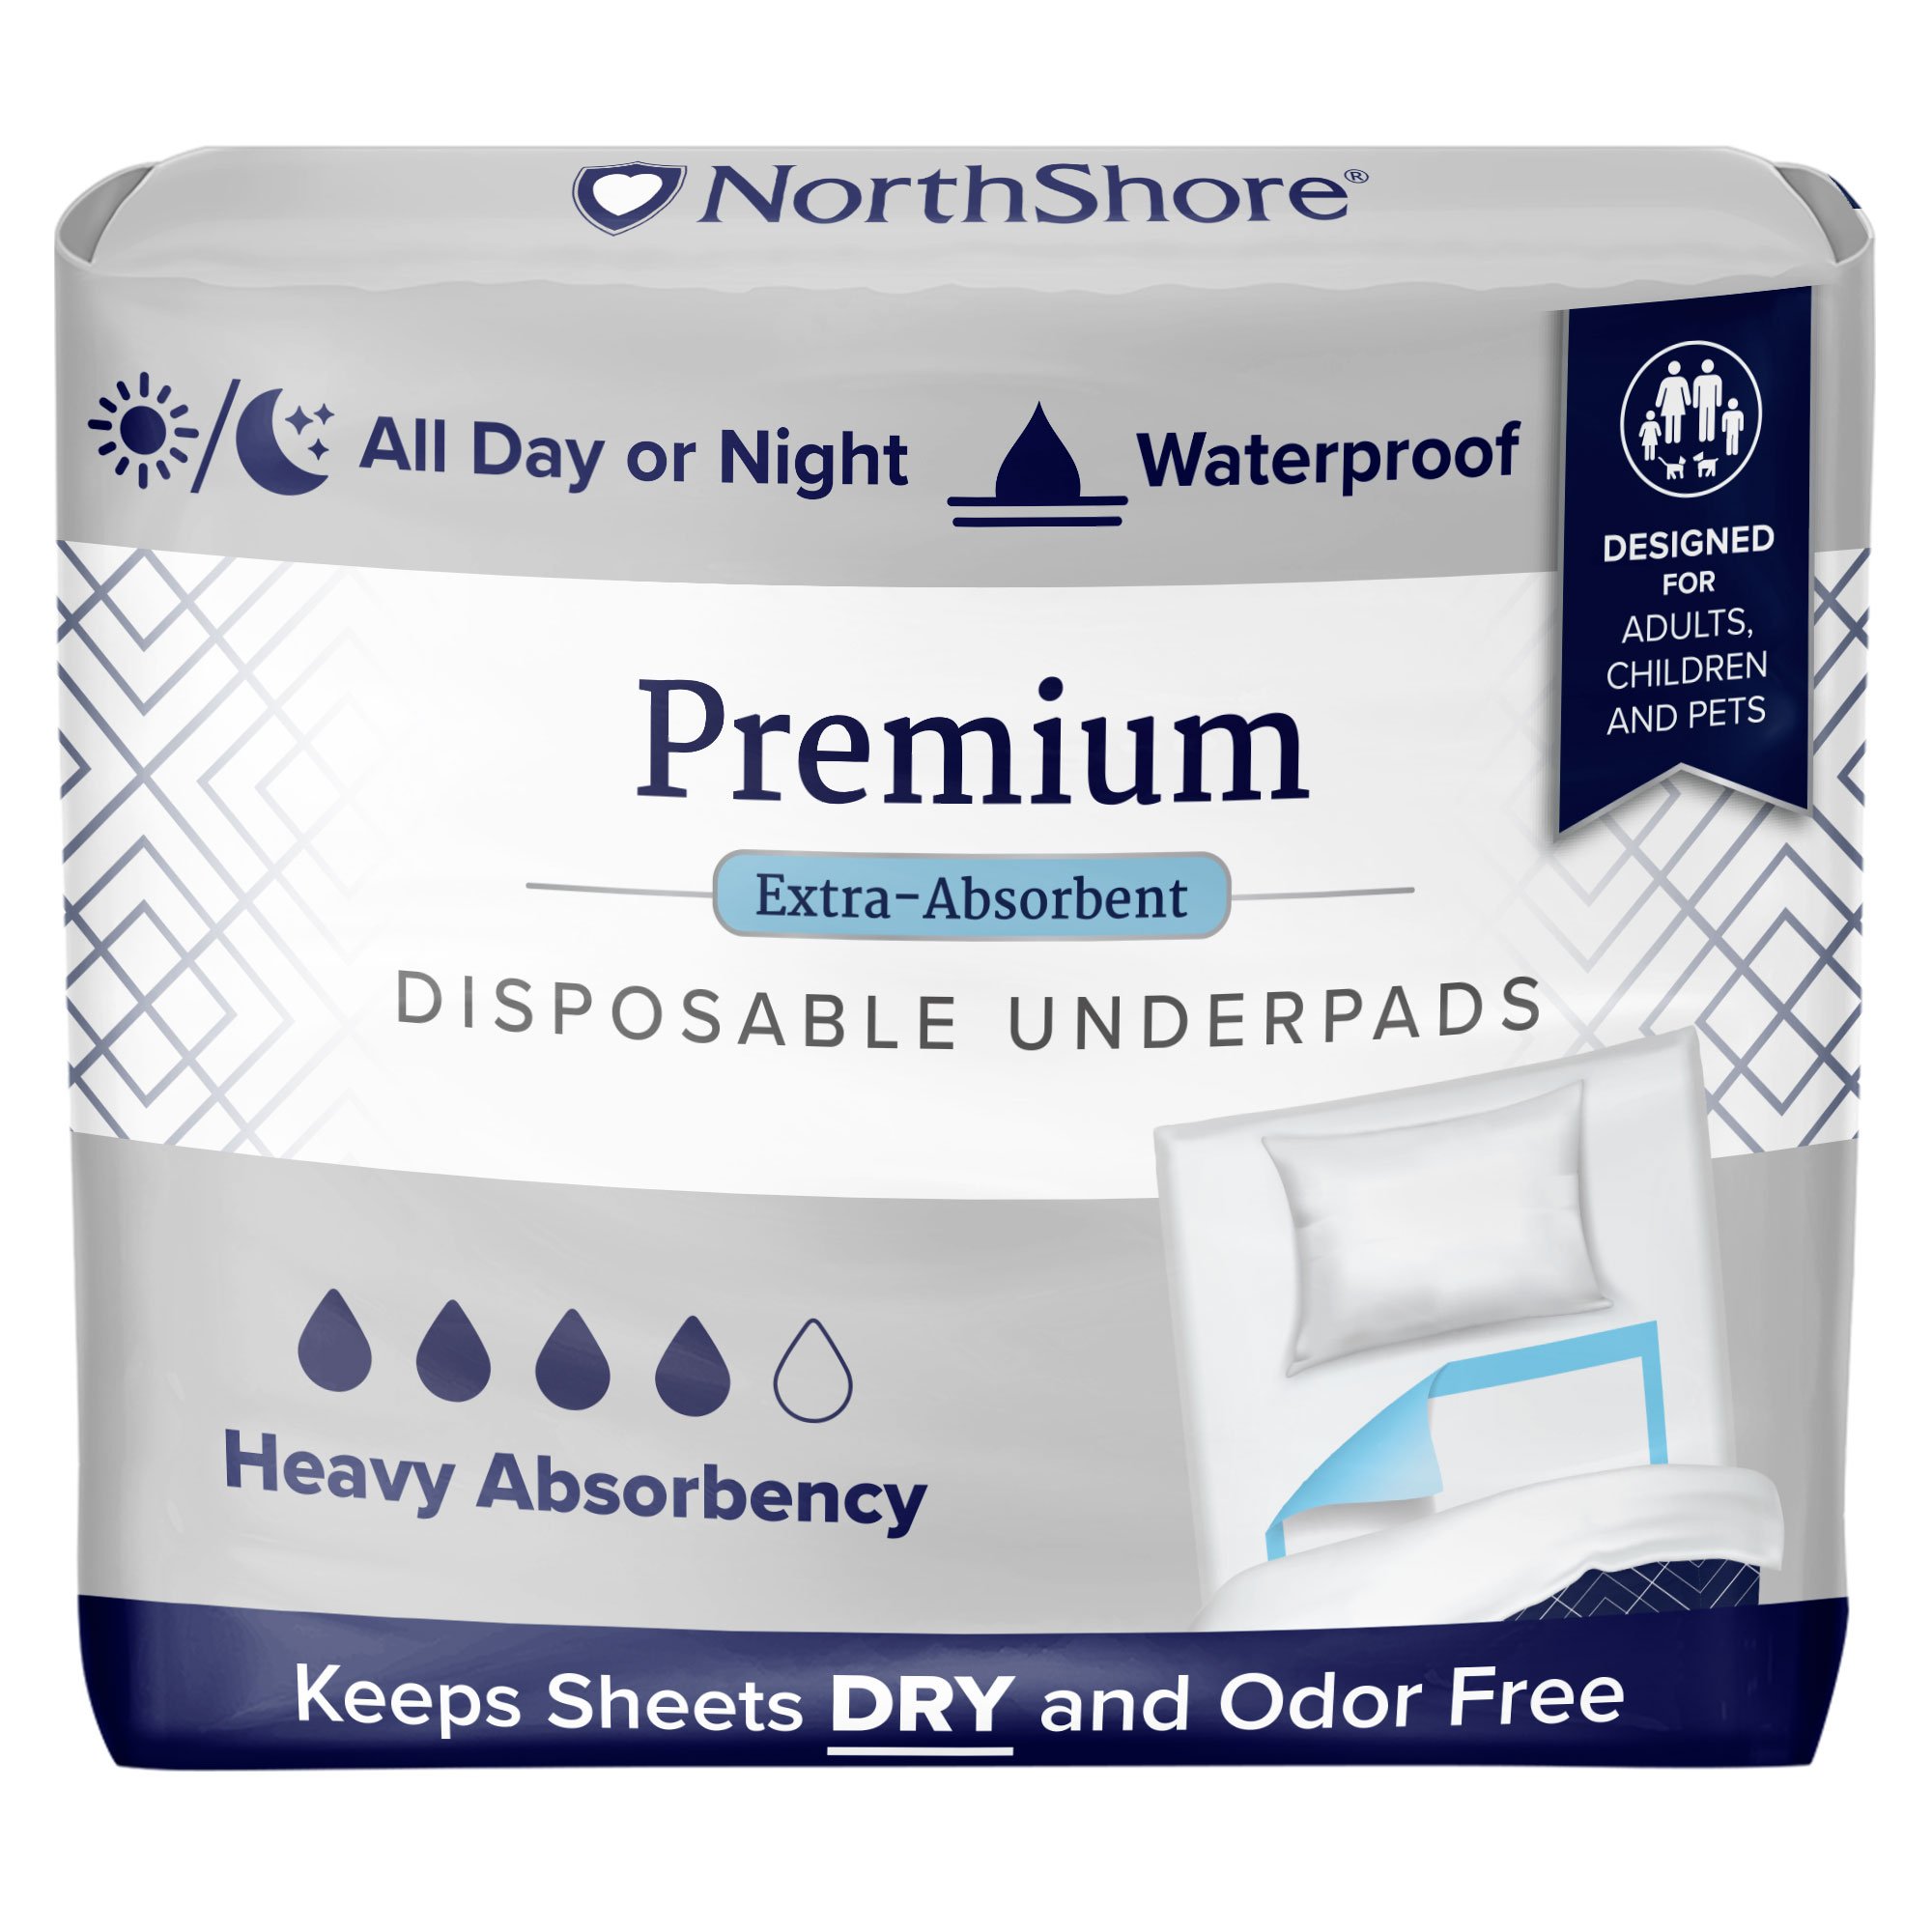 NorthShore Premium Extra-Absorbent Disposable Underpads